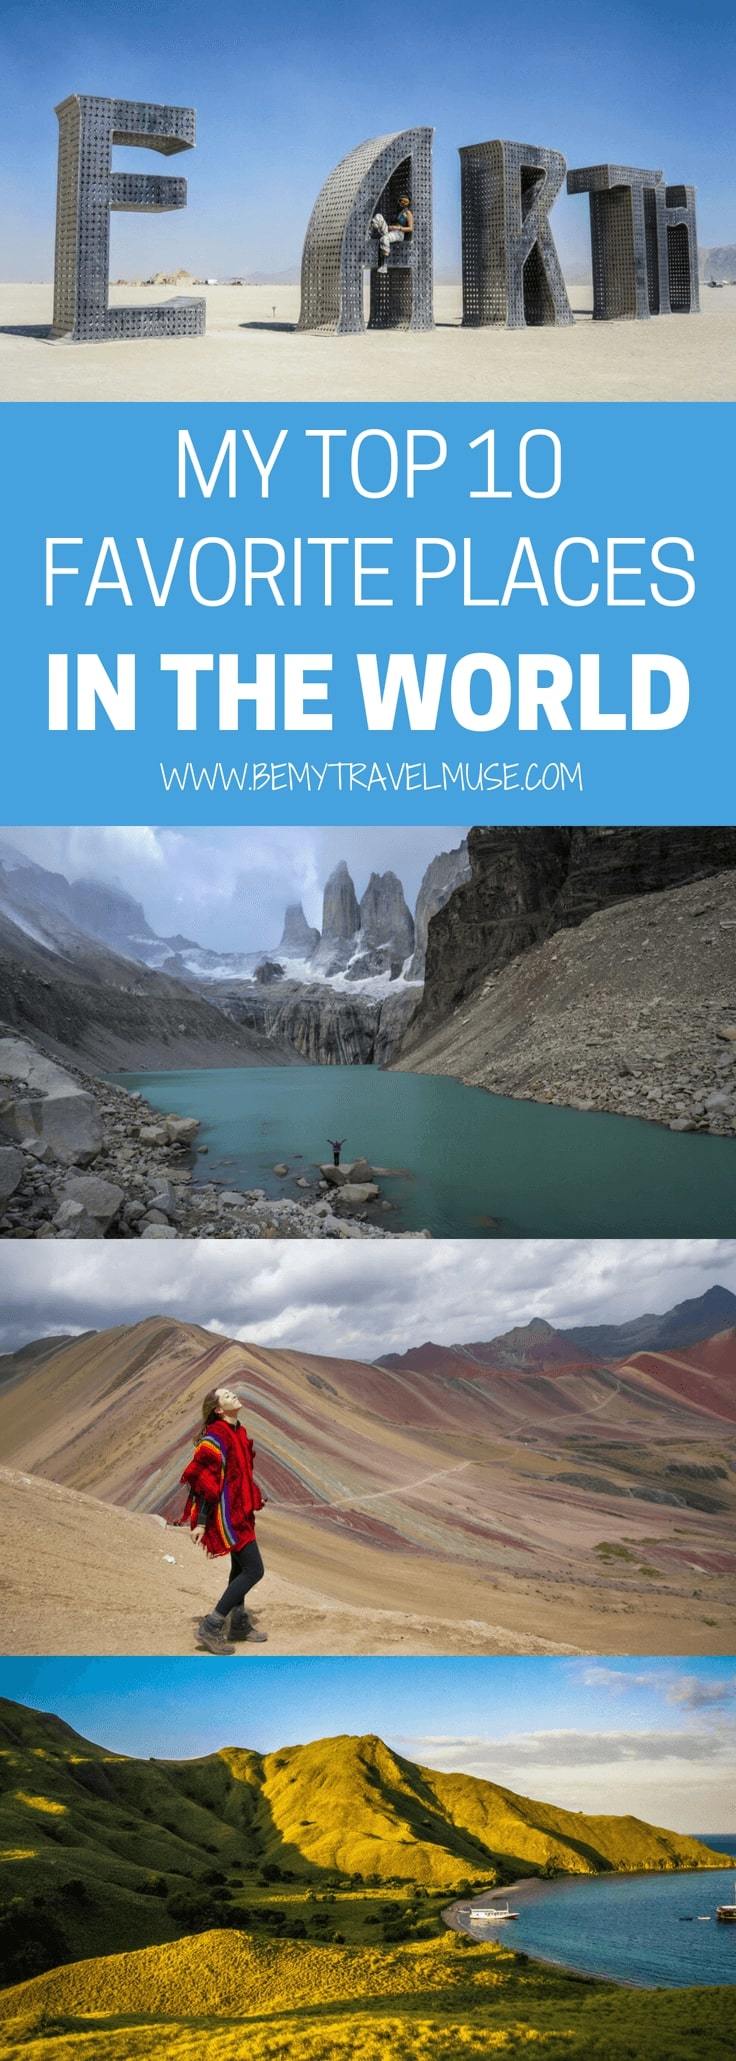 Looking for epic places to go for your next adventure? After traveling around the world for close to 6 years, here are my top favorite places in the world. Some were off the beaten path, some were amazing hikes that I will remember forever, and some, I almost want to keep it to myself! #bucketlisttravel